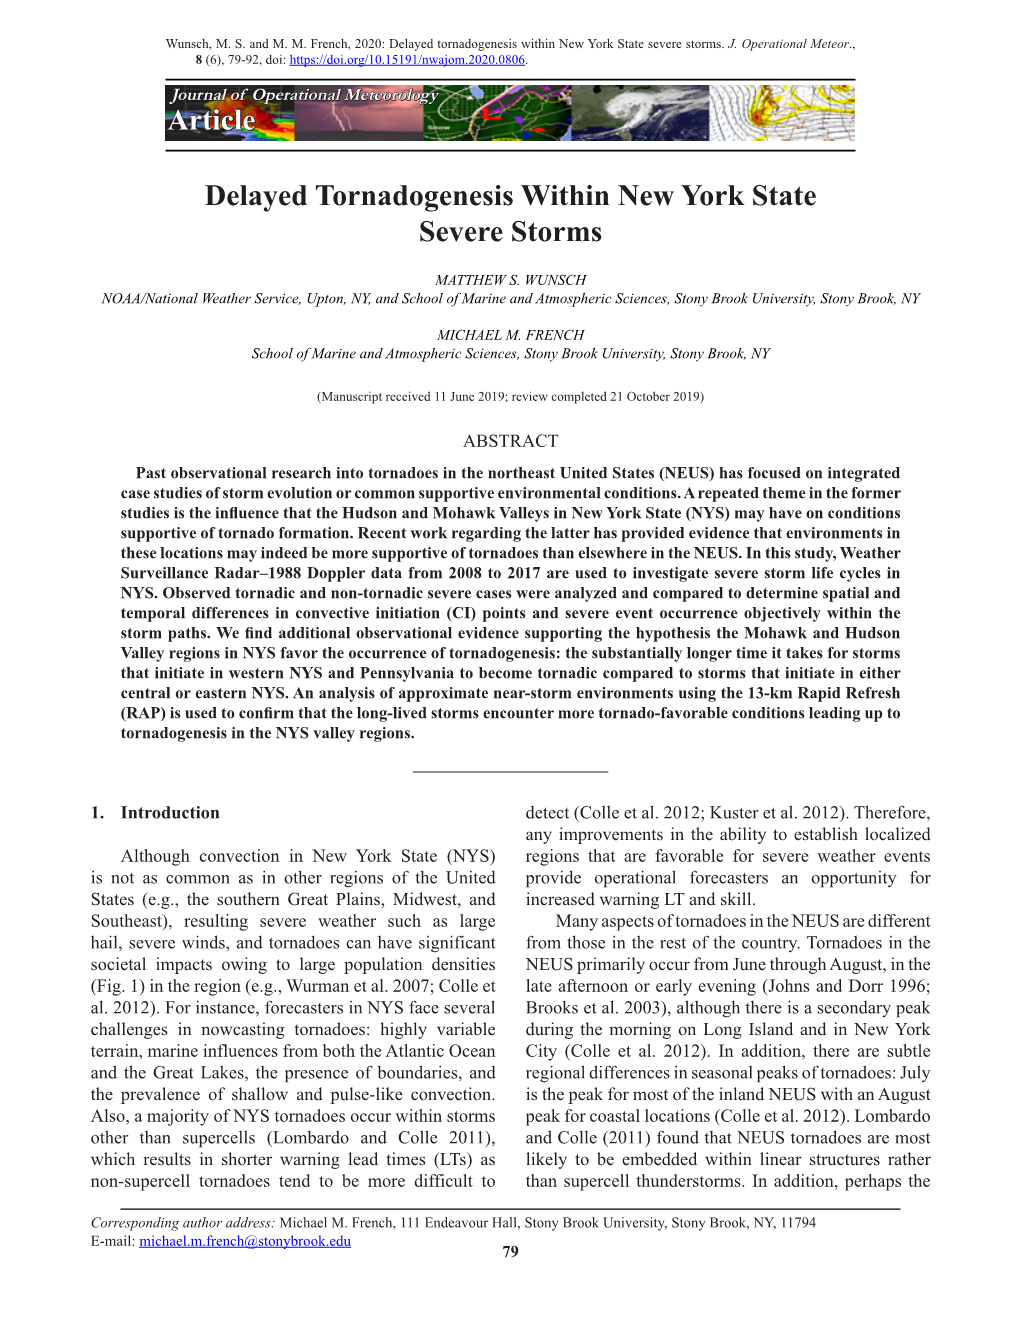 Delayed Tornadogenesis Within New York State Severe Storms Article